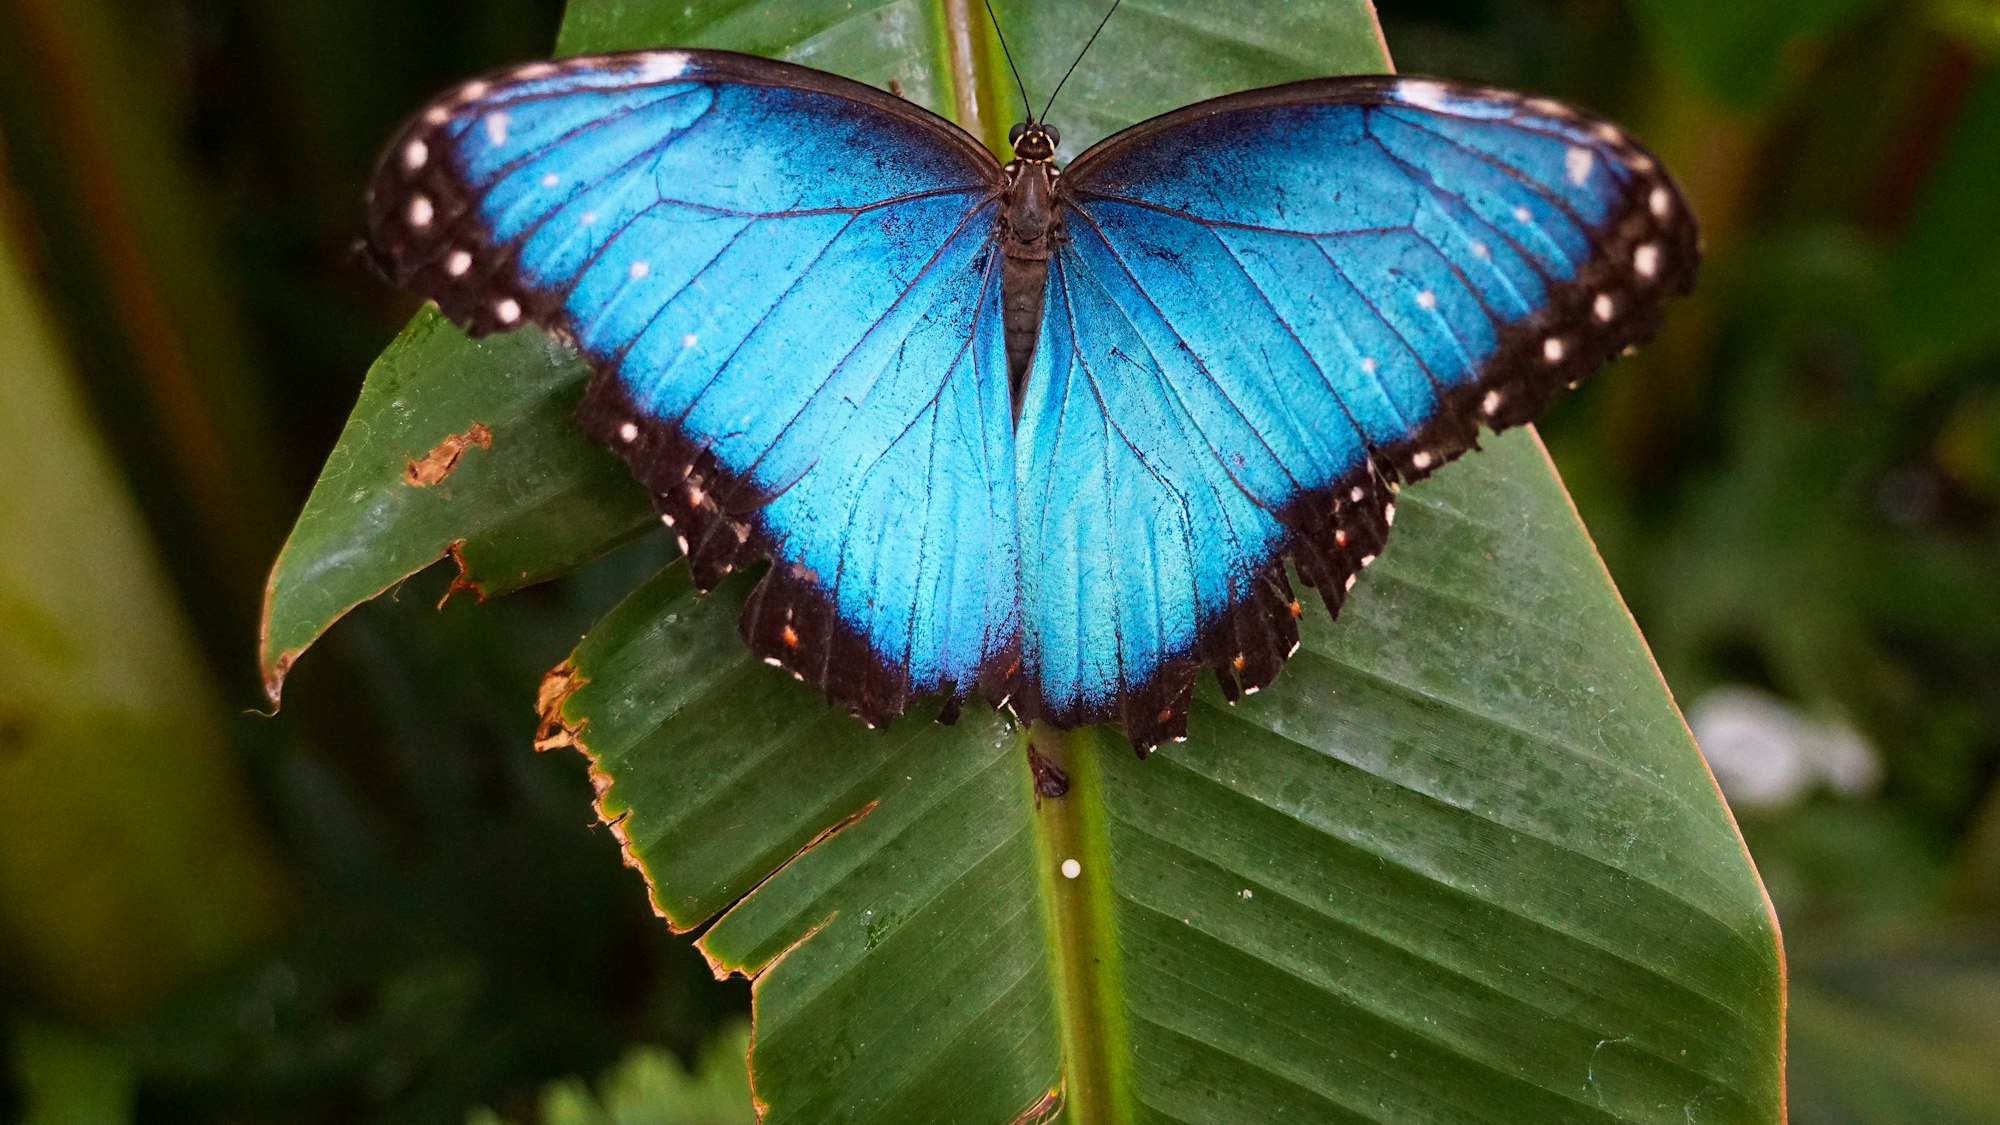 Rhetenor Blue Morpho - Dorsal side. Very rare Papillion.
Thousands are killed for domestic displays, sold to tourists or in gift shops.
Follow us:  https://www.damononroad.com